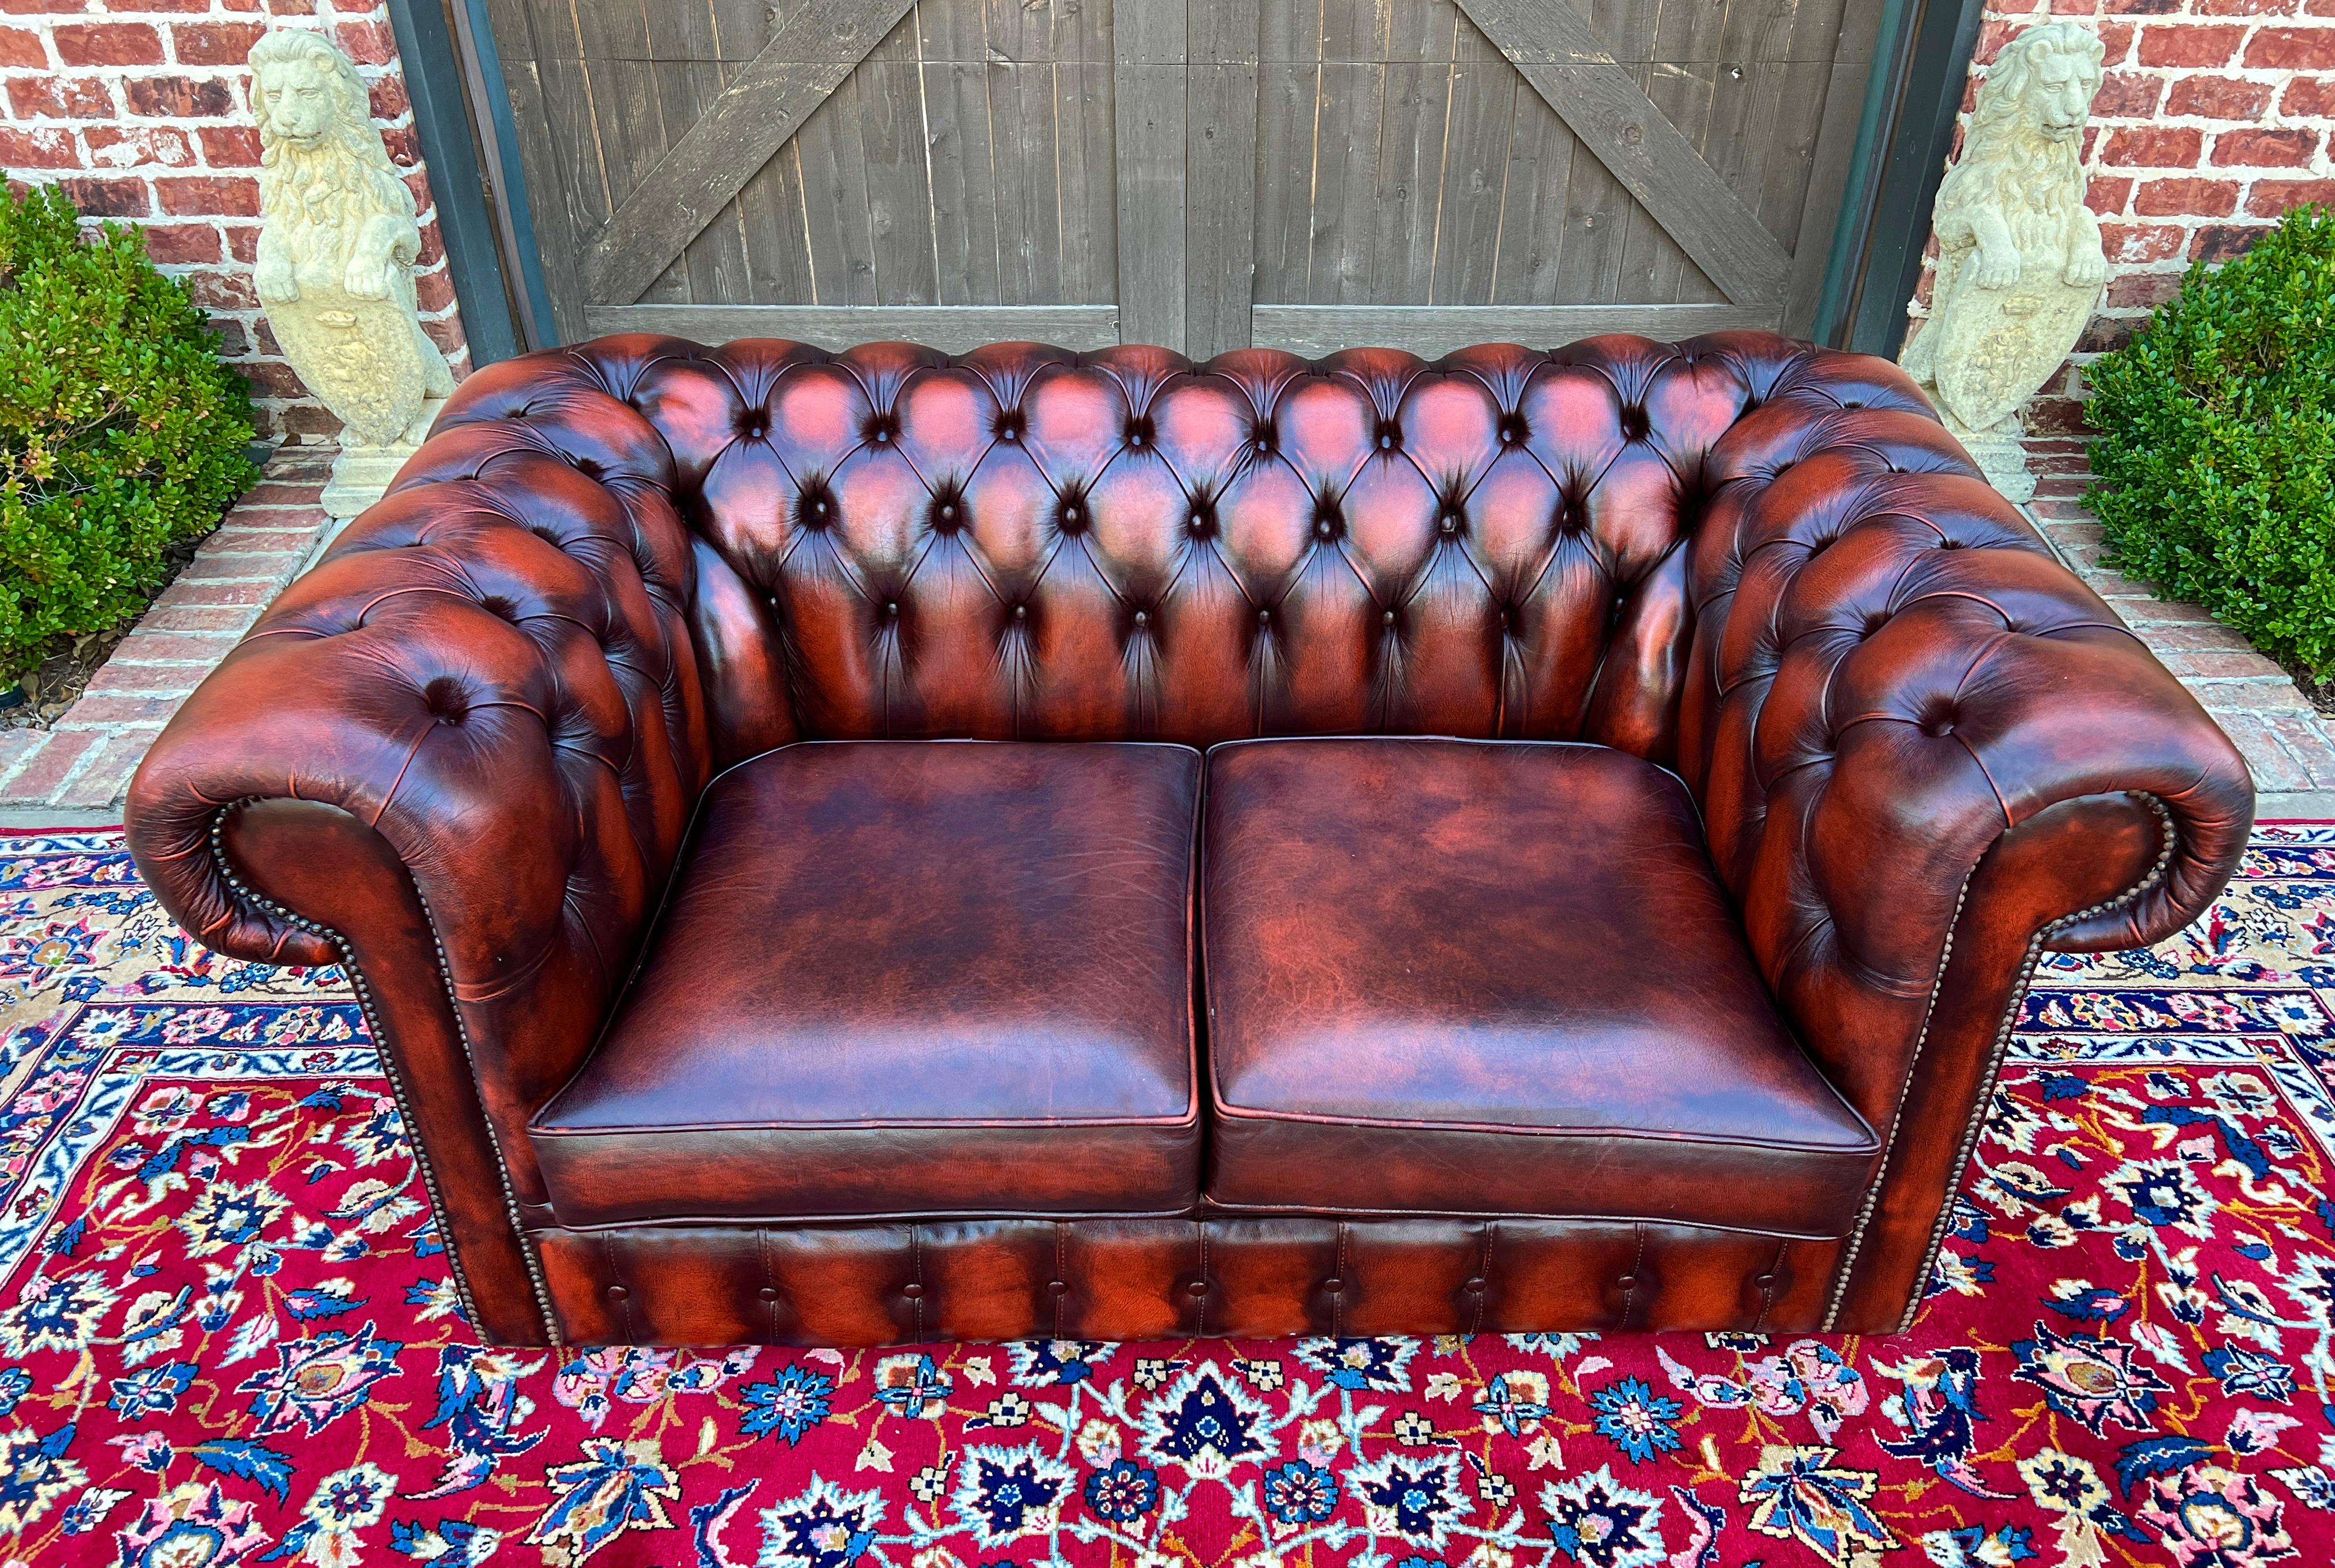 Vintage English Chesterfield Leather Tufted Love Seat Sofa Oxblood Red #1 For Sale 3